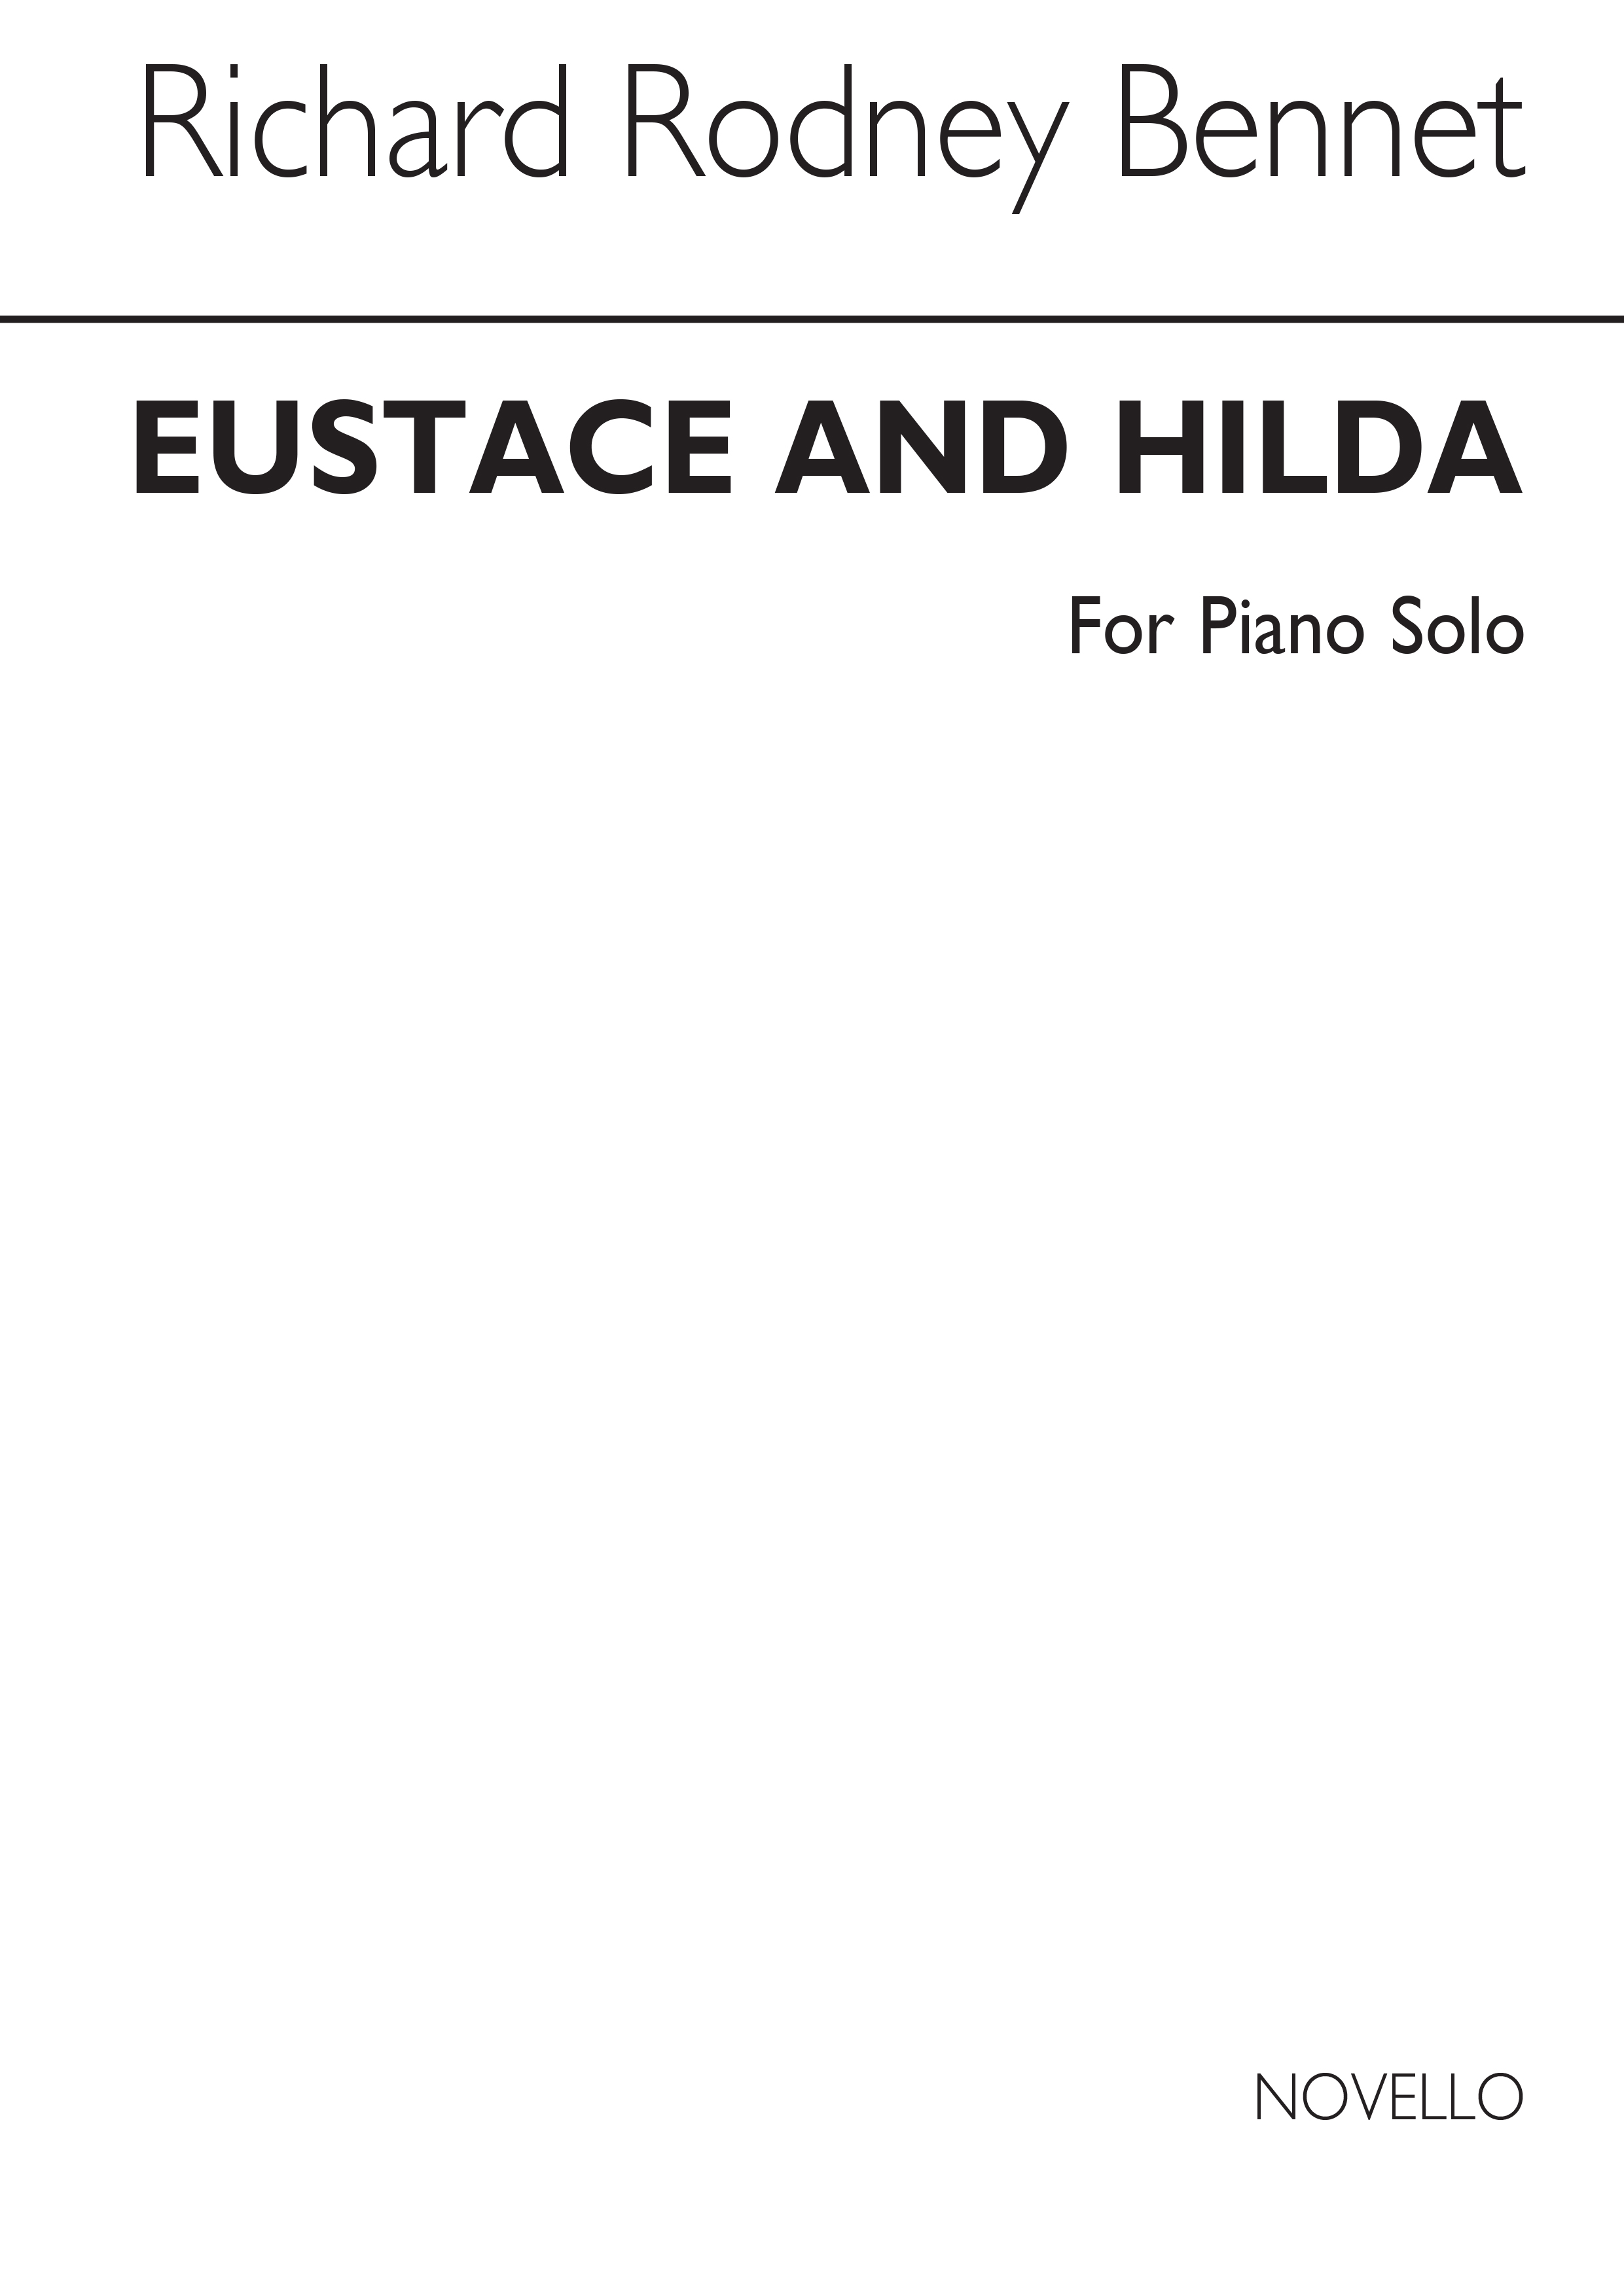 RR Bennett: Eustace And Hilda for Piano